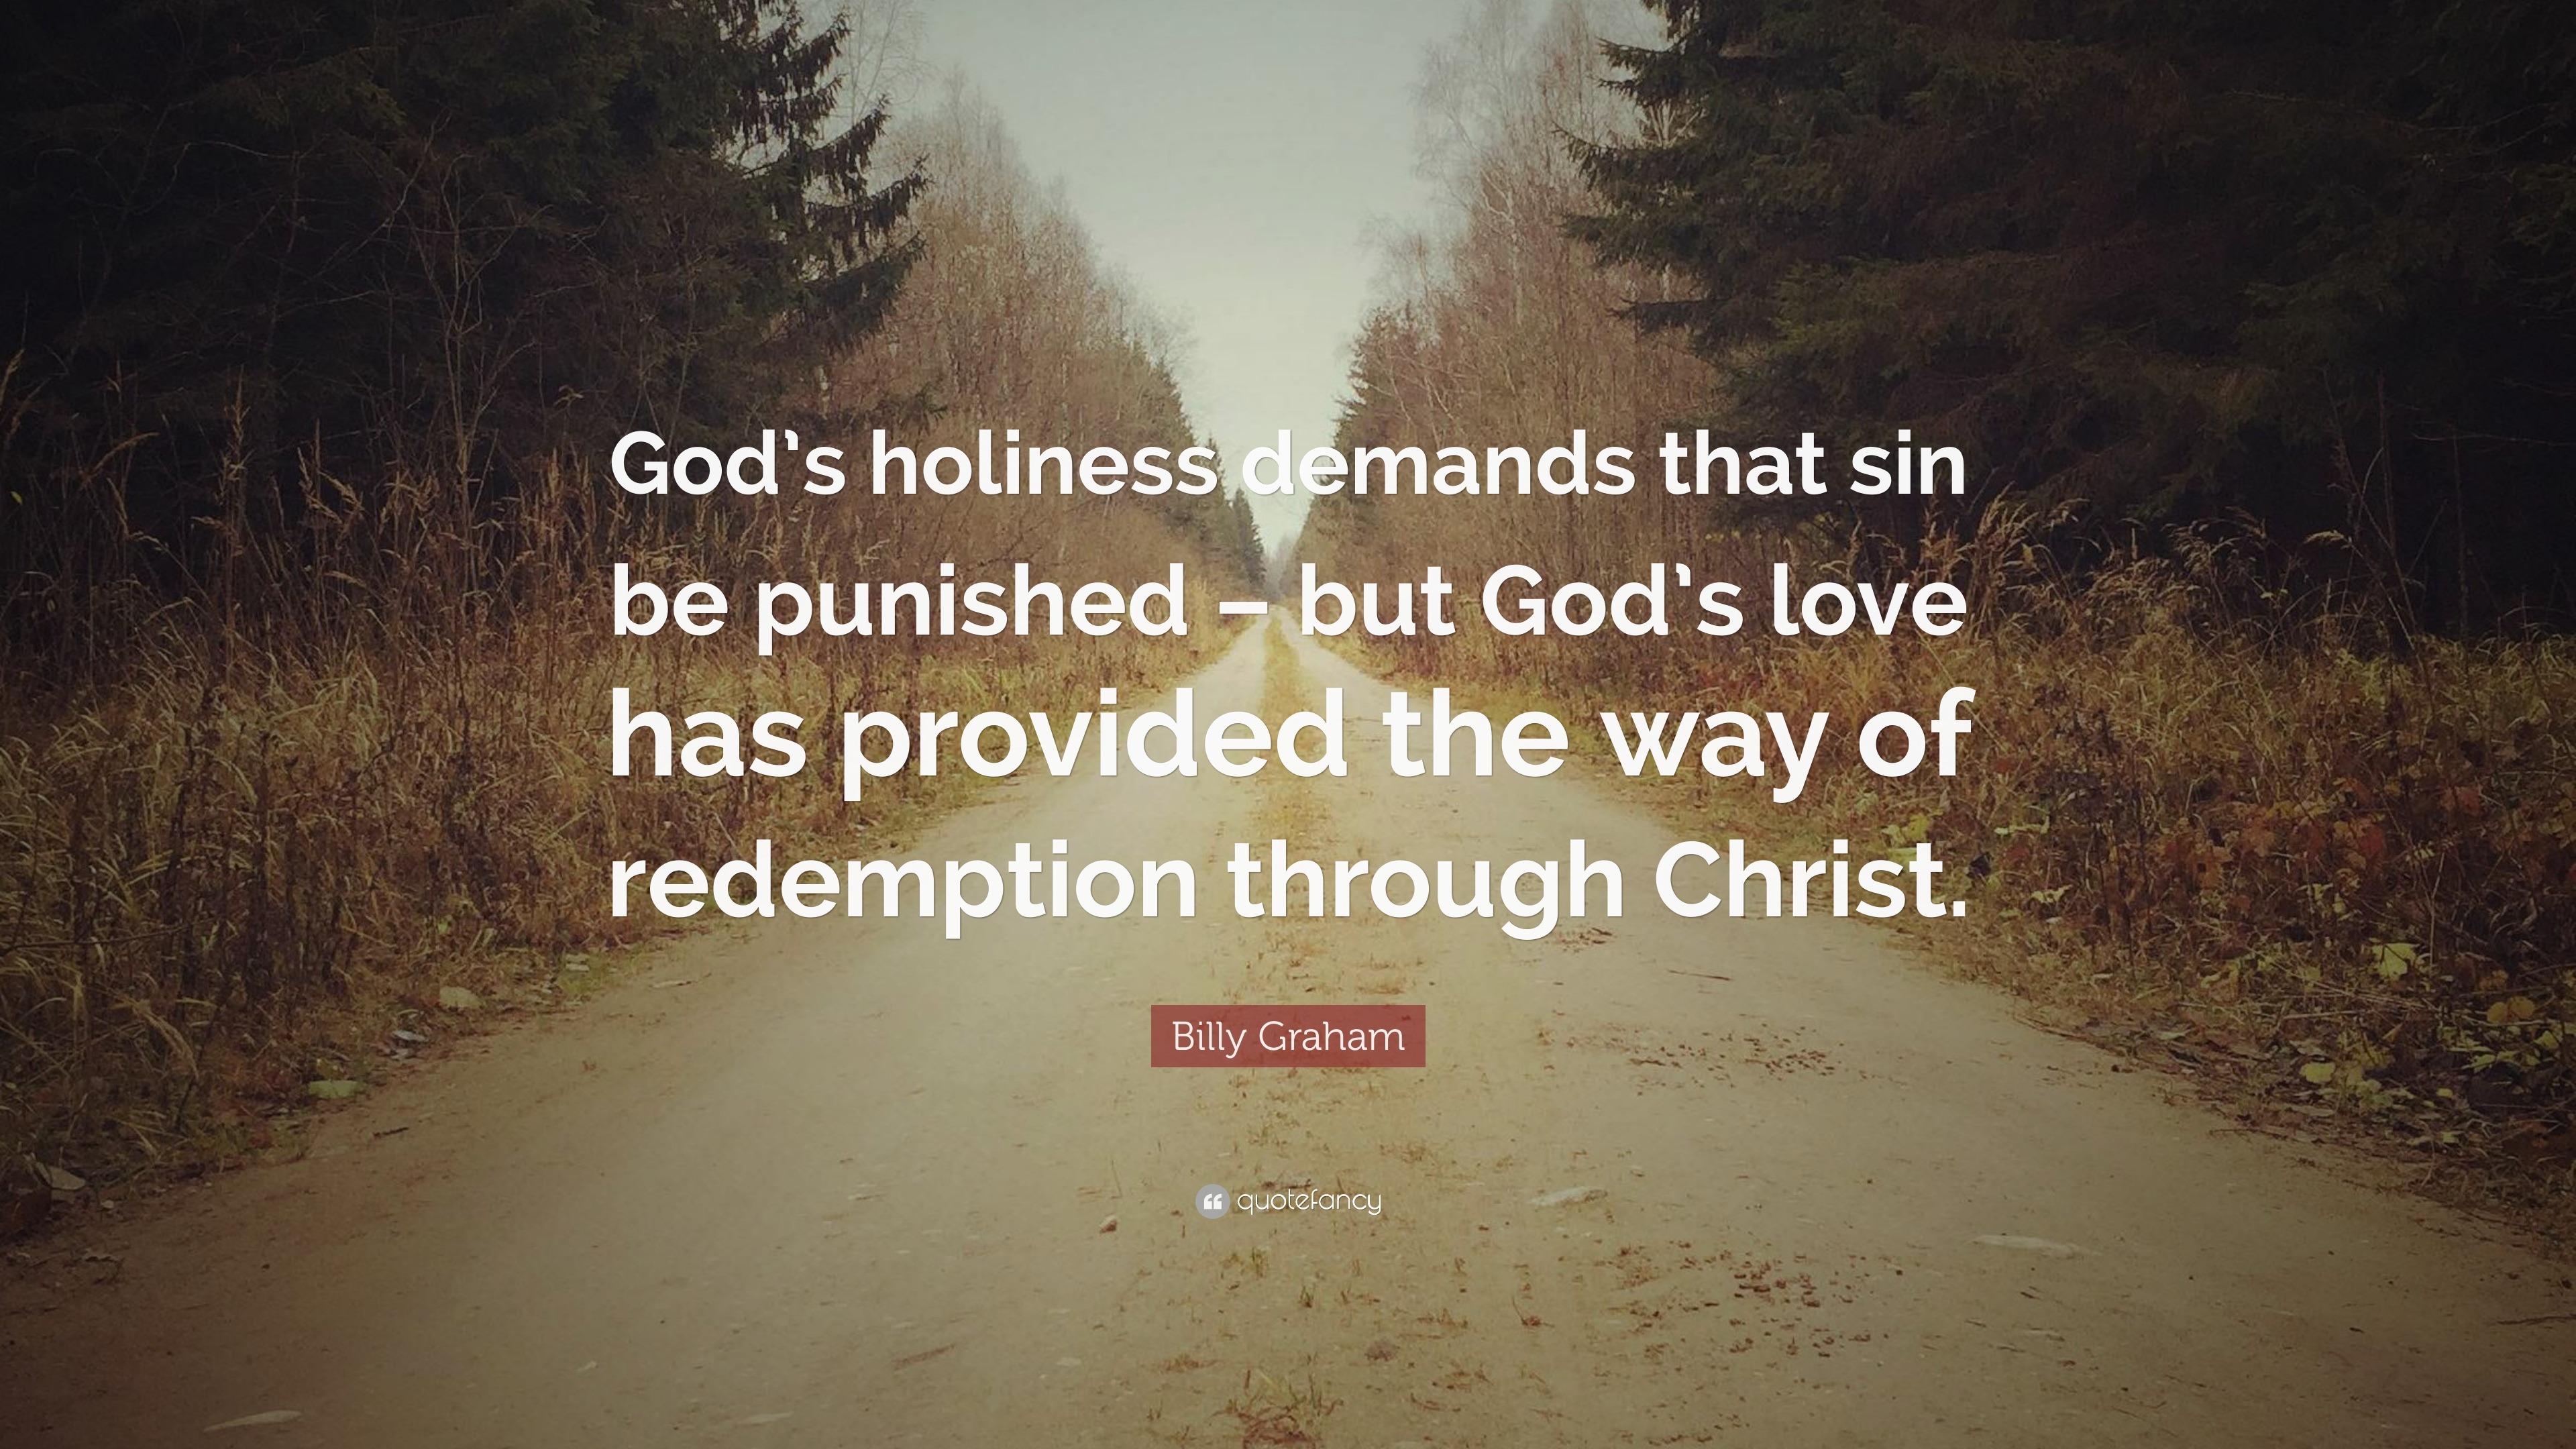 Billy Graham Quote: “God’s holiness demands that sin be punished – but